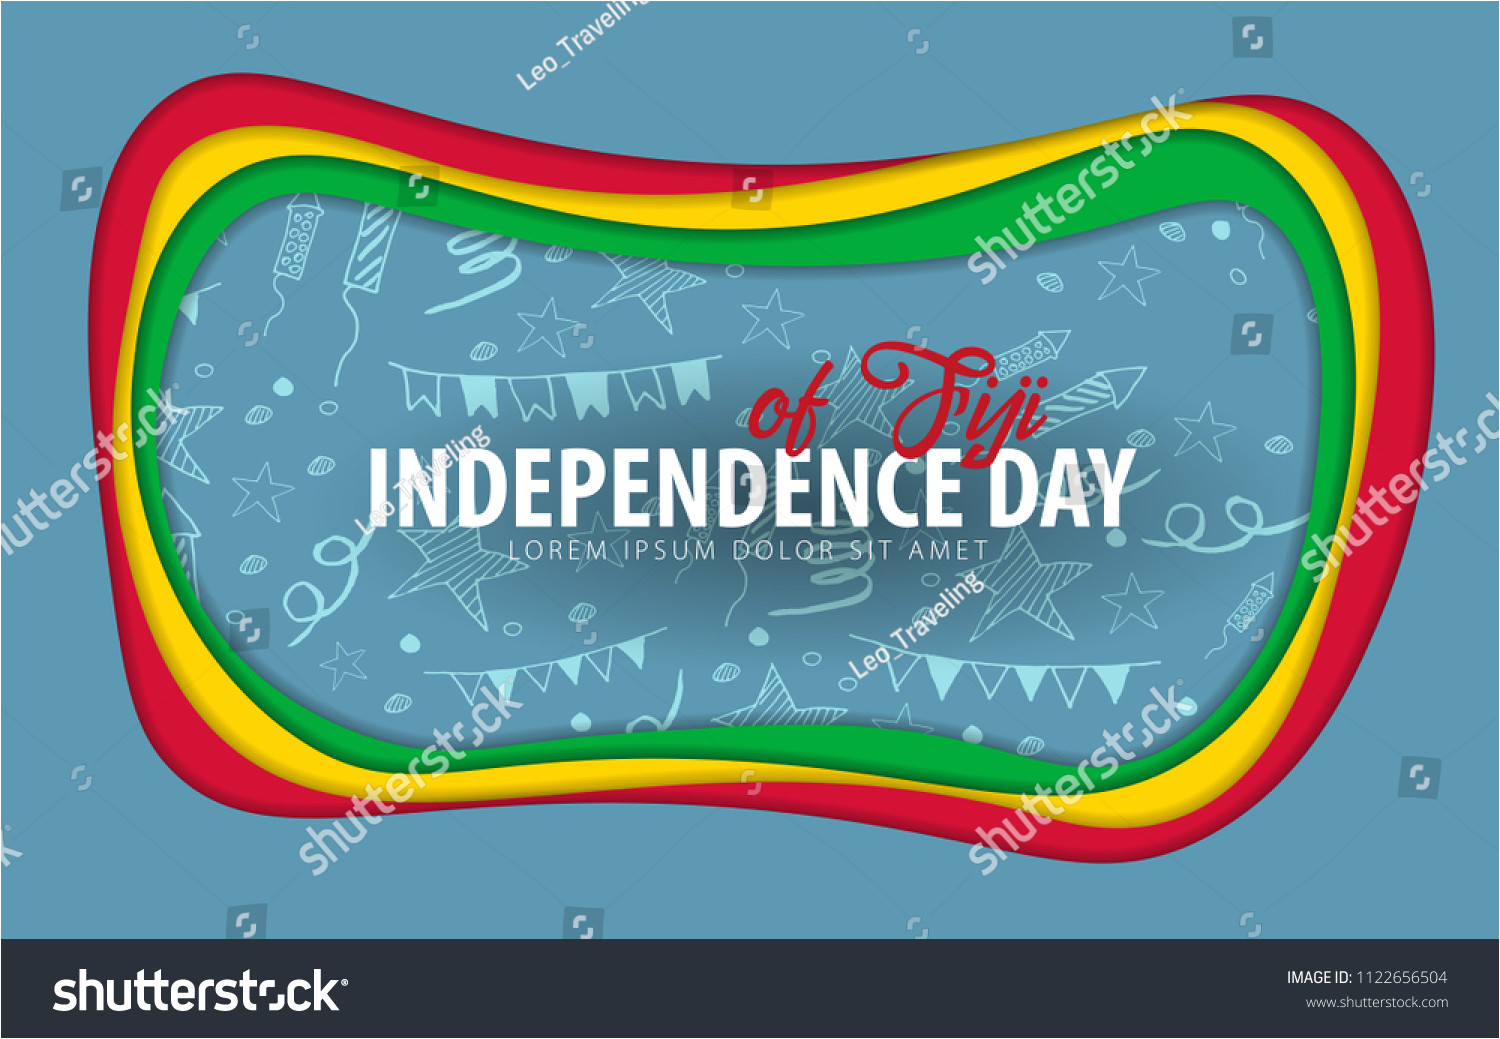 stock vector fiji independence day greeting card paper cut style 1122656504 jpg